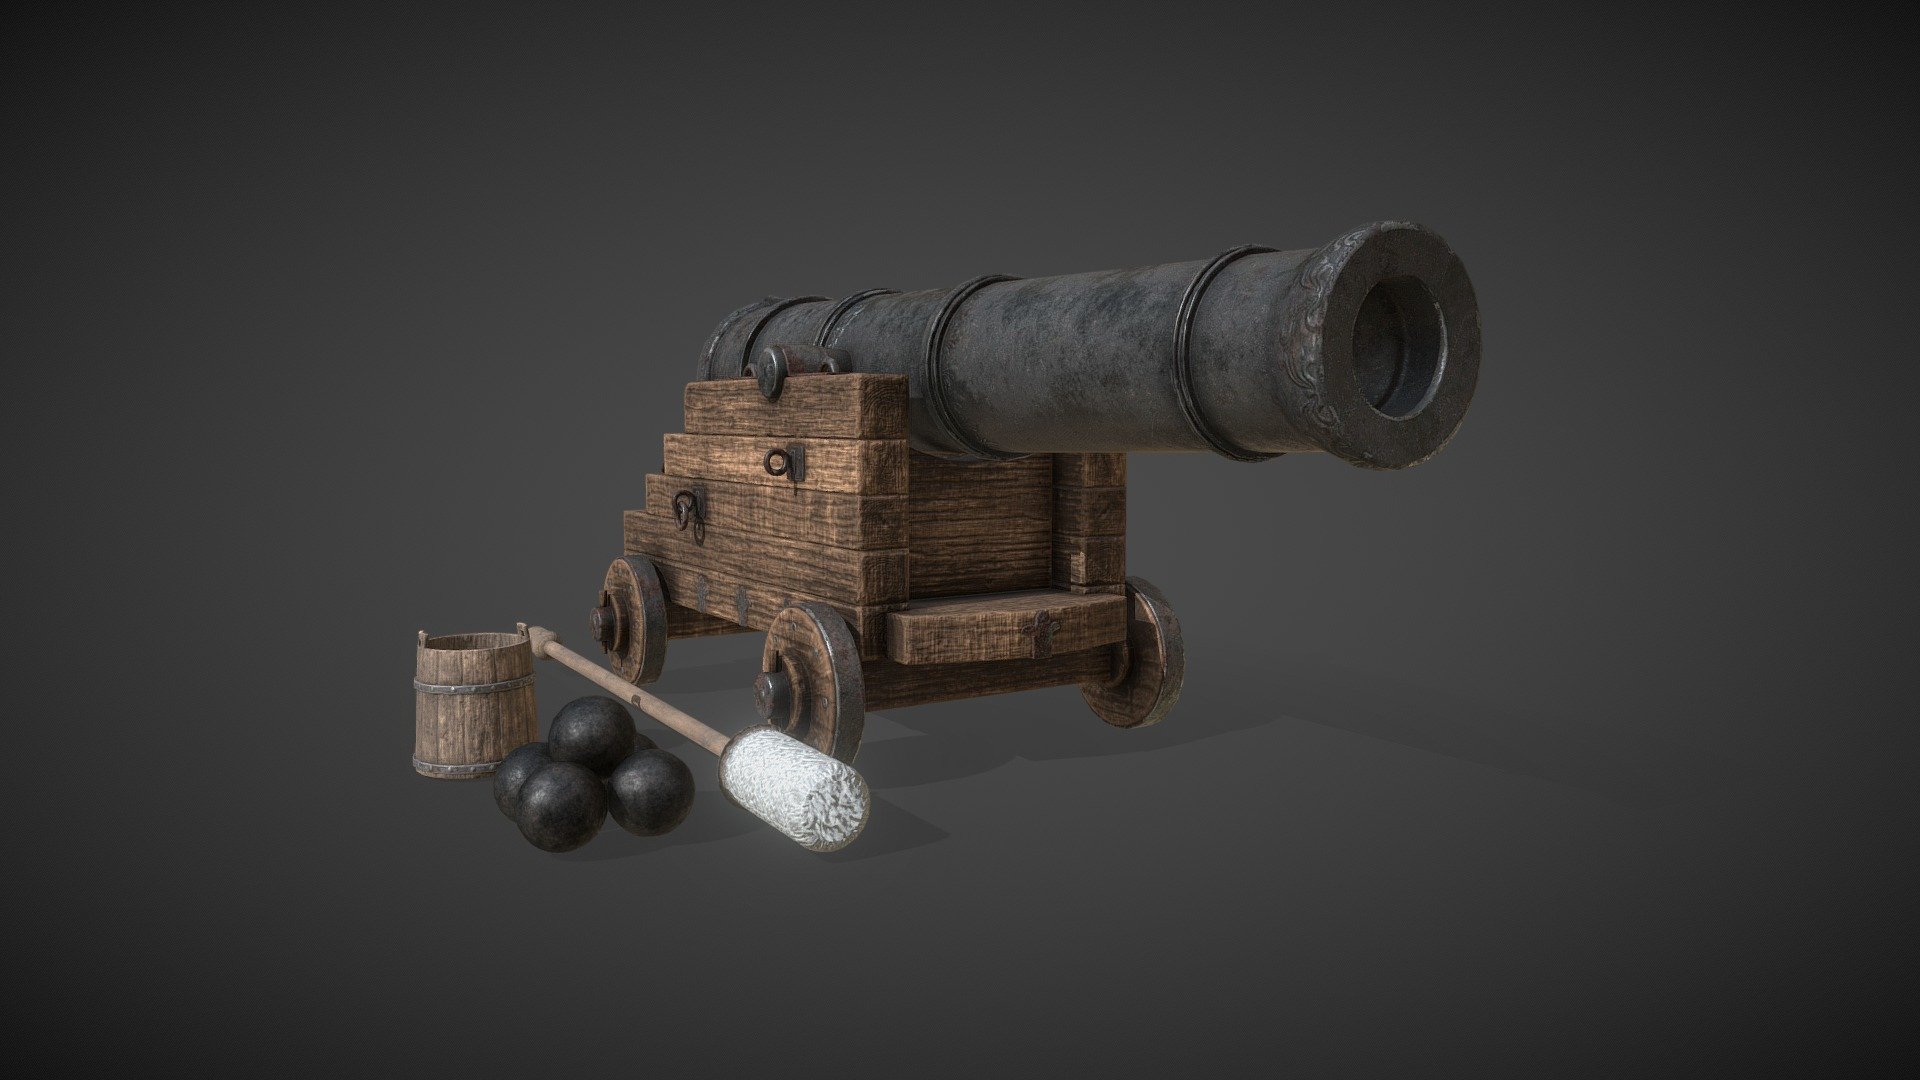 PBR Game-ready model of ship cannon. Textures resolution - 2048x2048 px. Additional .zip file contains 3d model in fbx format 3d model